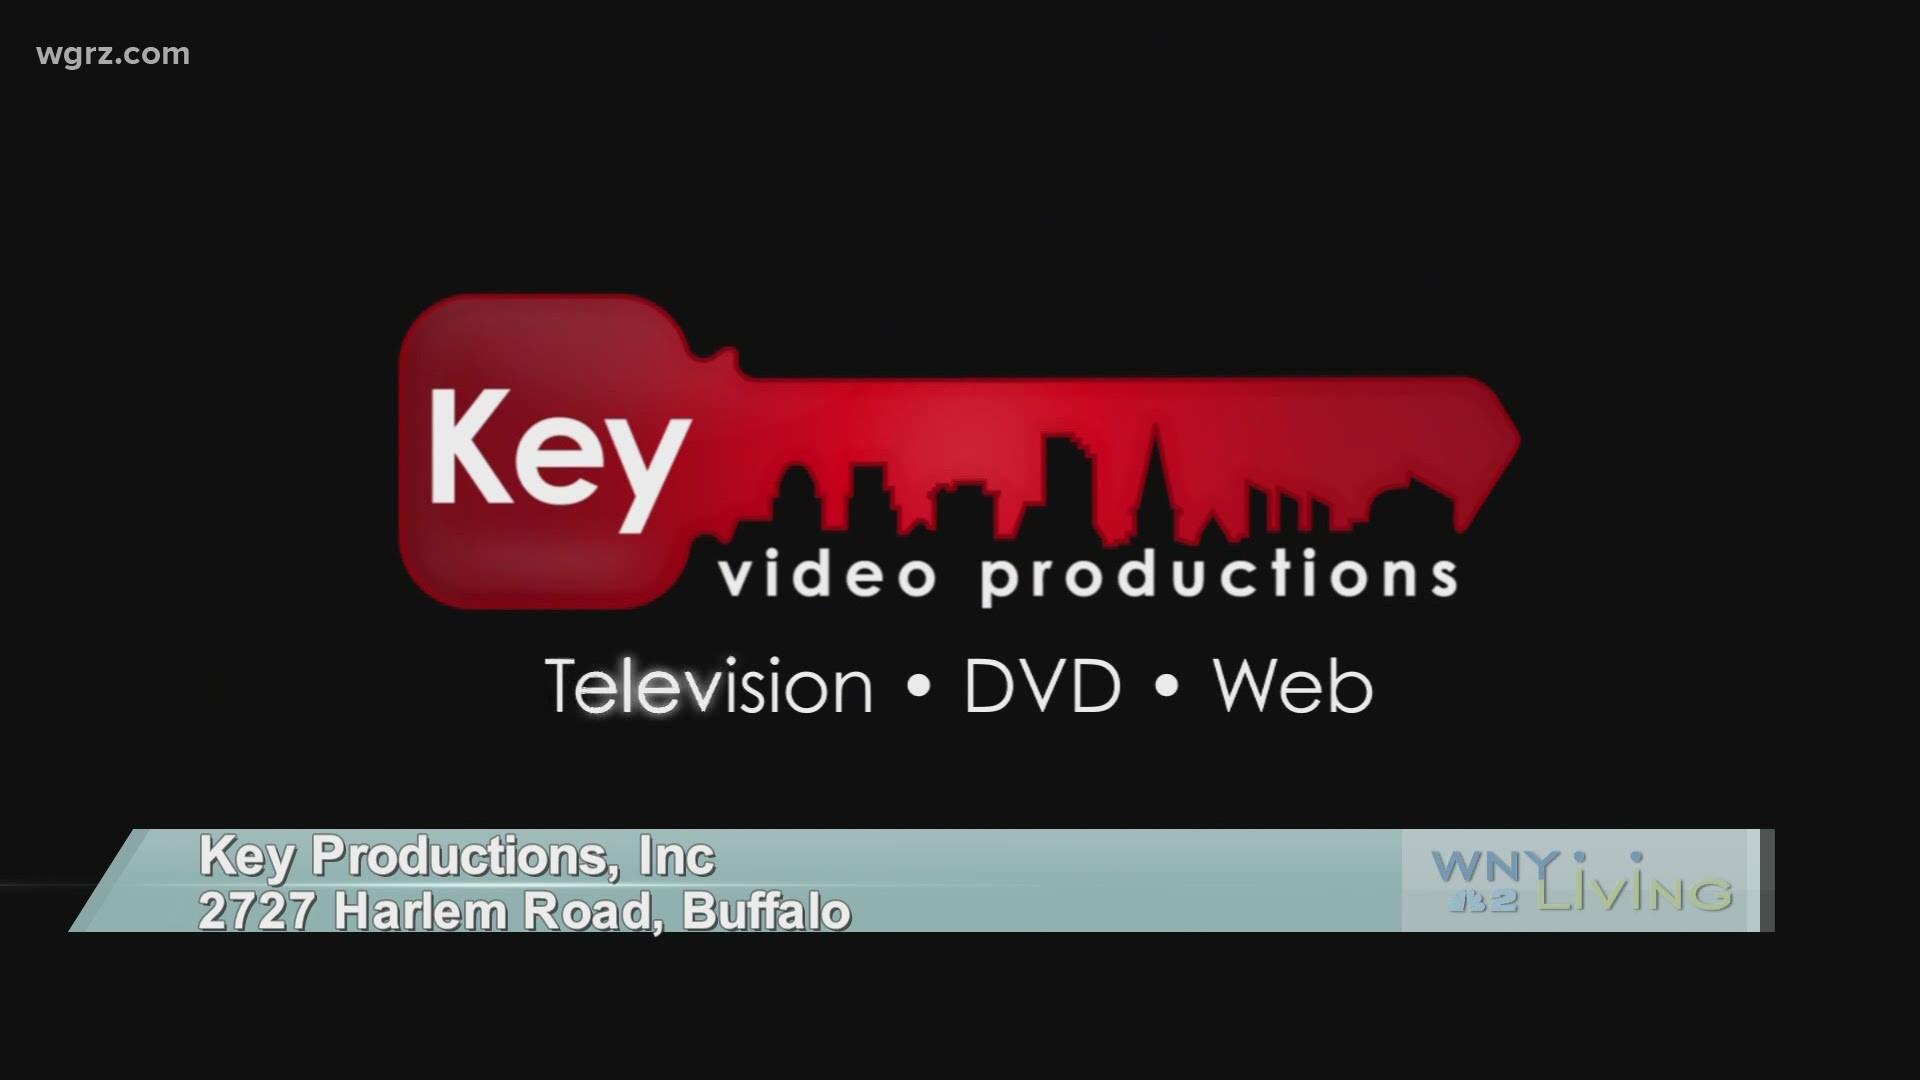 WNY Living - November 28 - Key Productions, Inc. (THIS VIDEO IS SPONSORED BY KEY PRODUCTIONS, INC.)